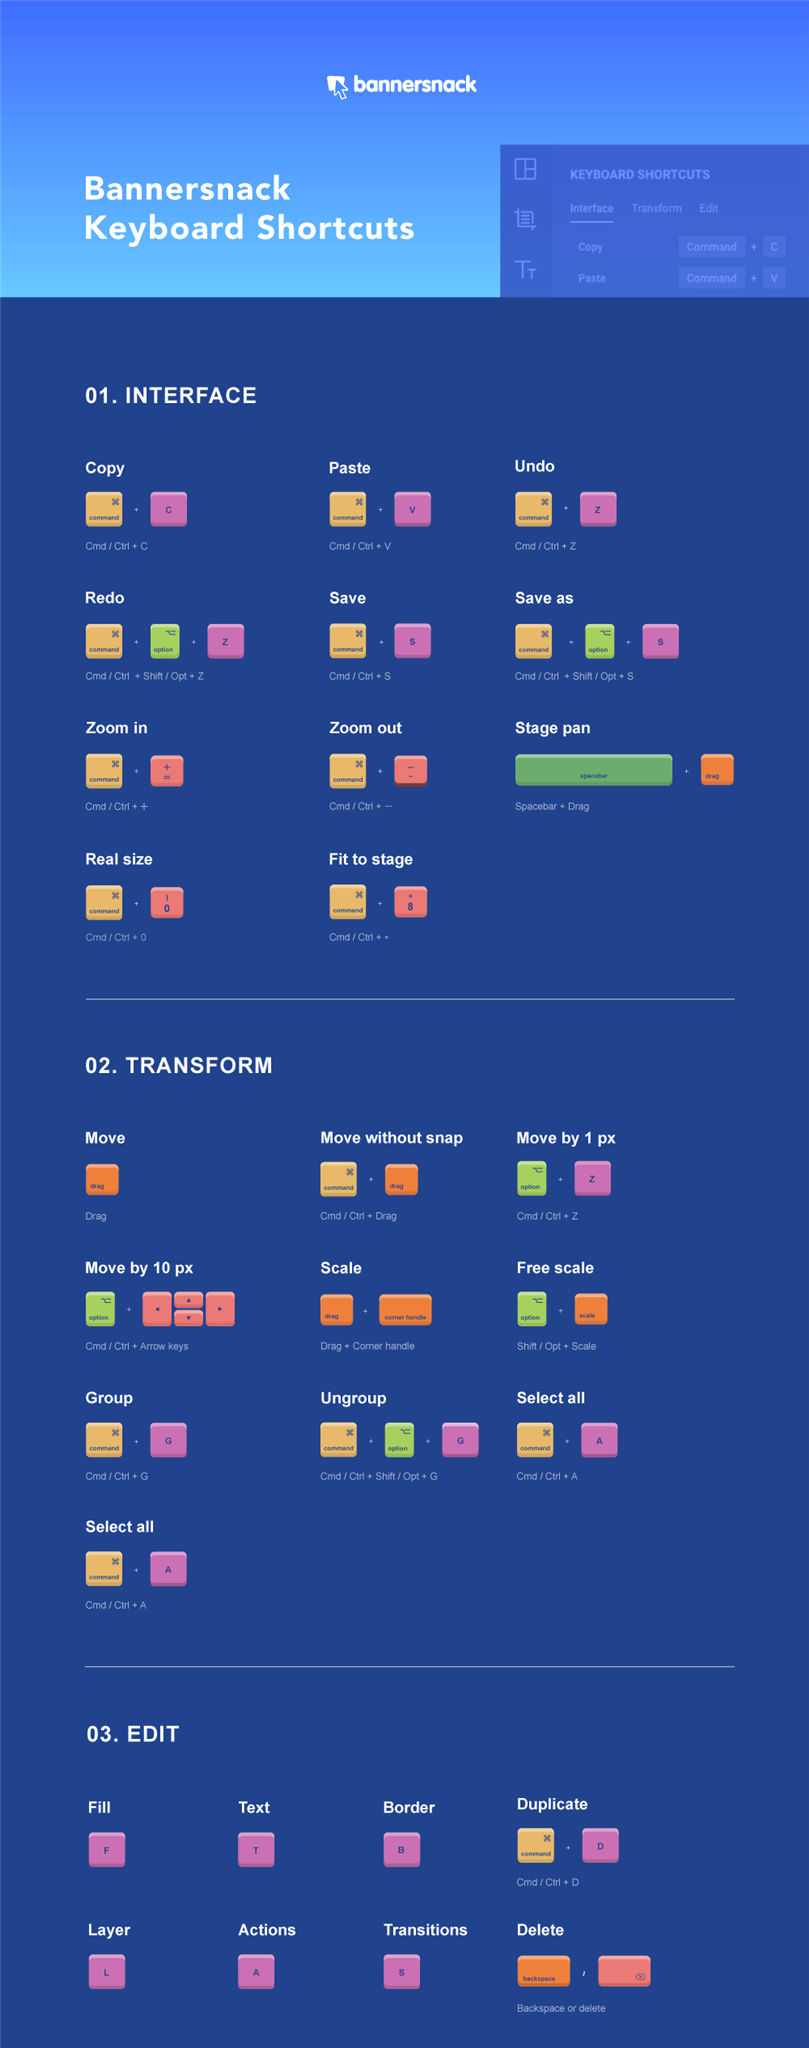 Keyboard_Shortcuts_Infographic.png